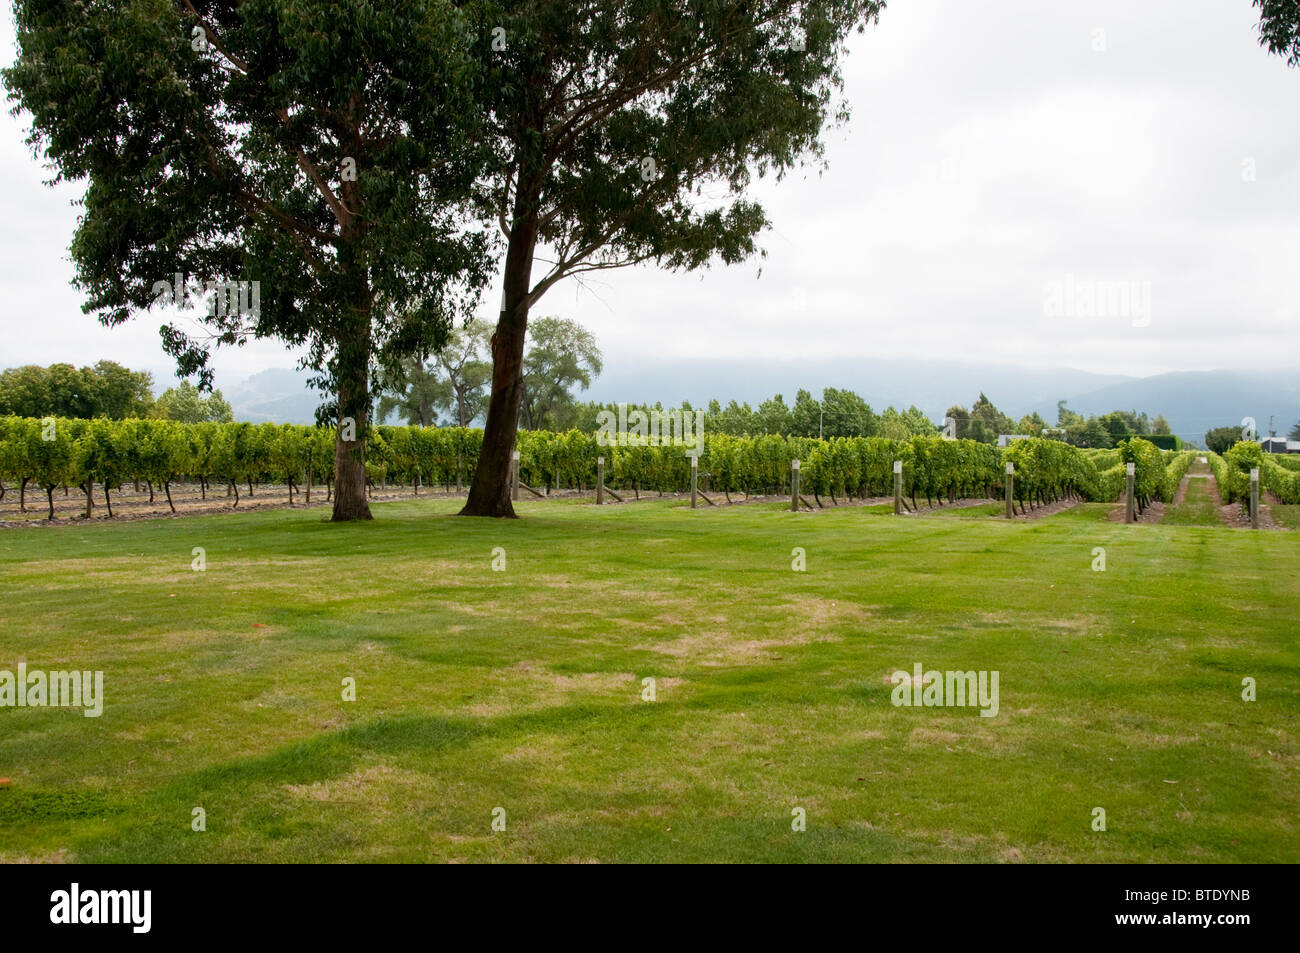 Cloudy bay winery hi-res stock photography and images - Alamy